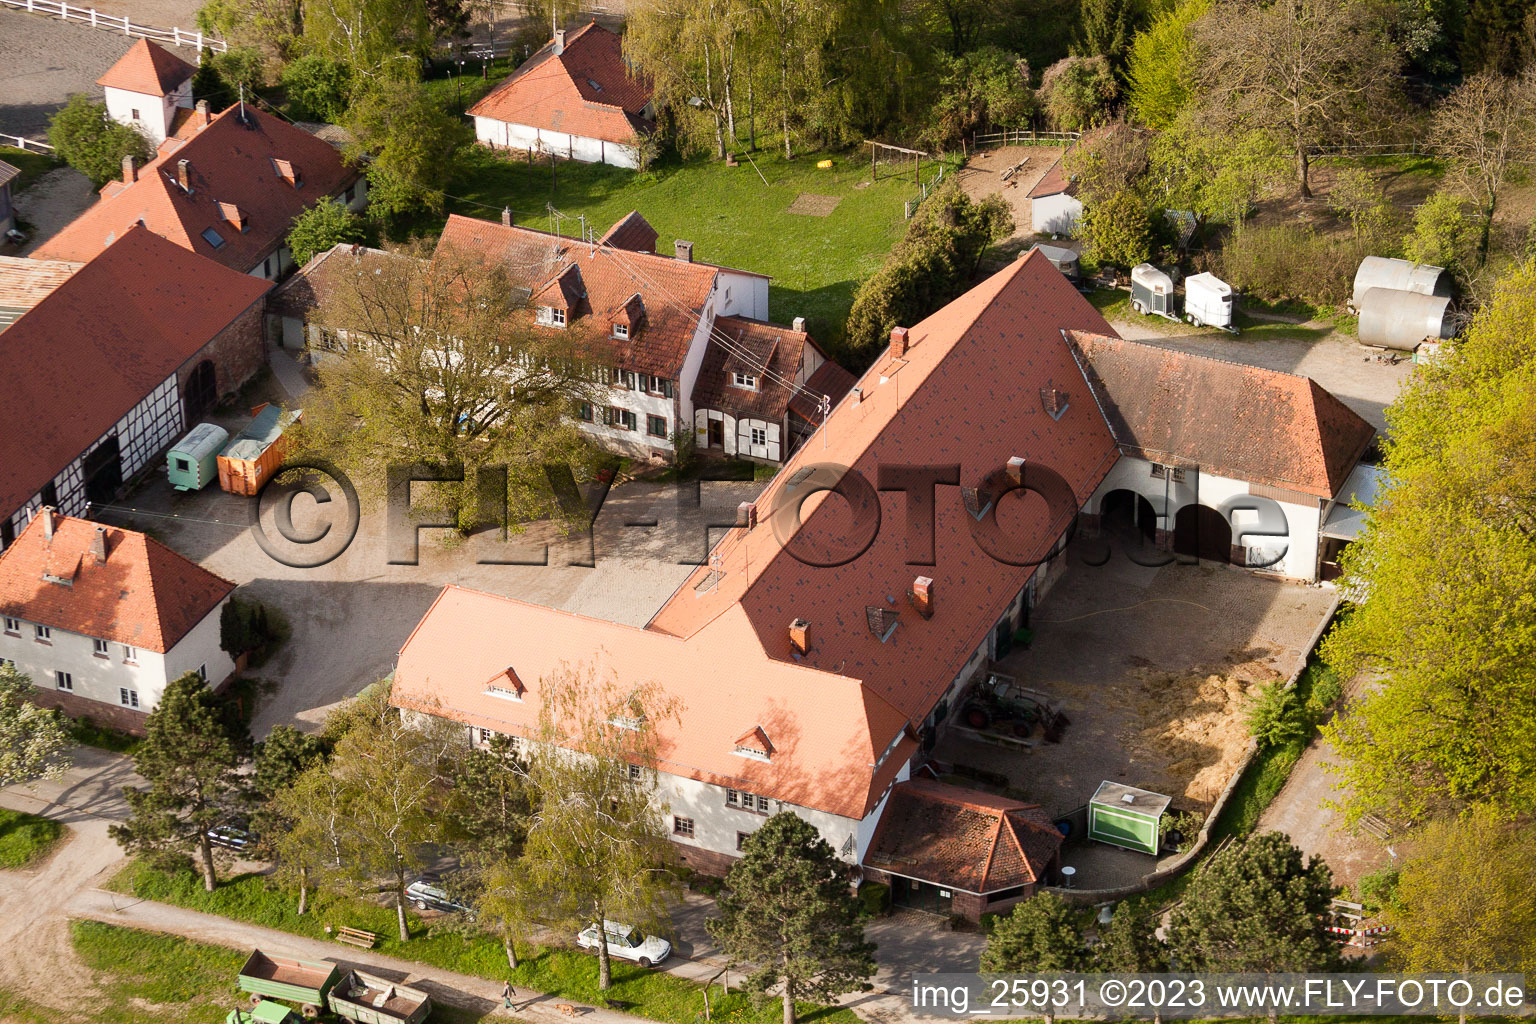 Rittnerthof in the district Durlach in Karlsruhe in the state Baden-Wuerttemberg, Germany from the plane